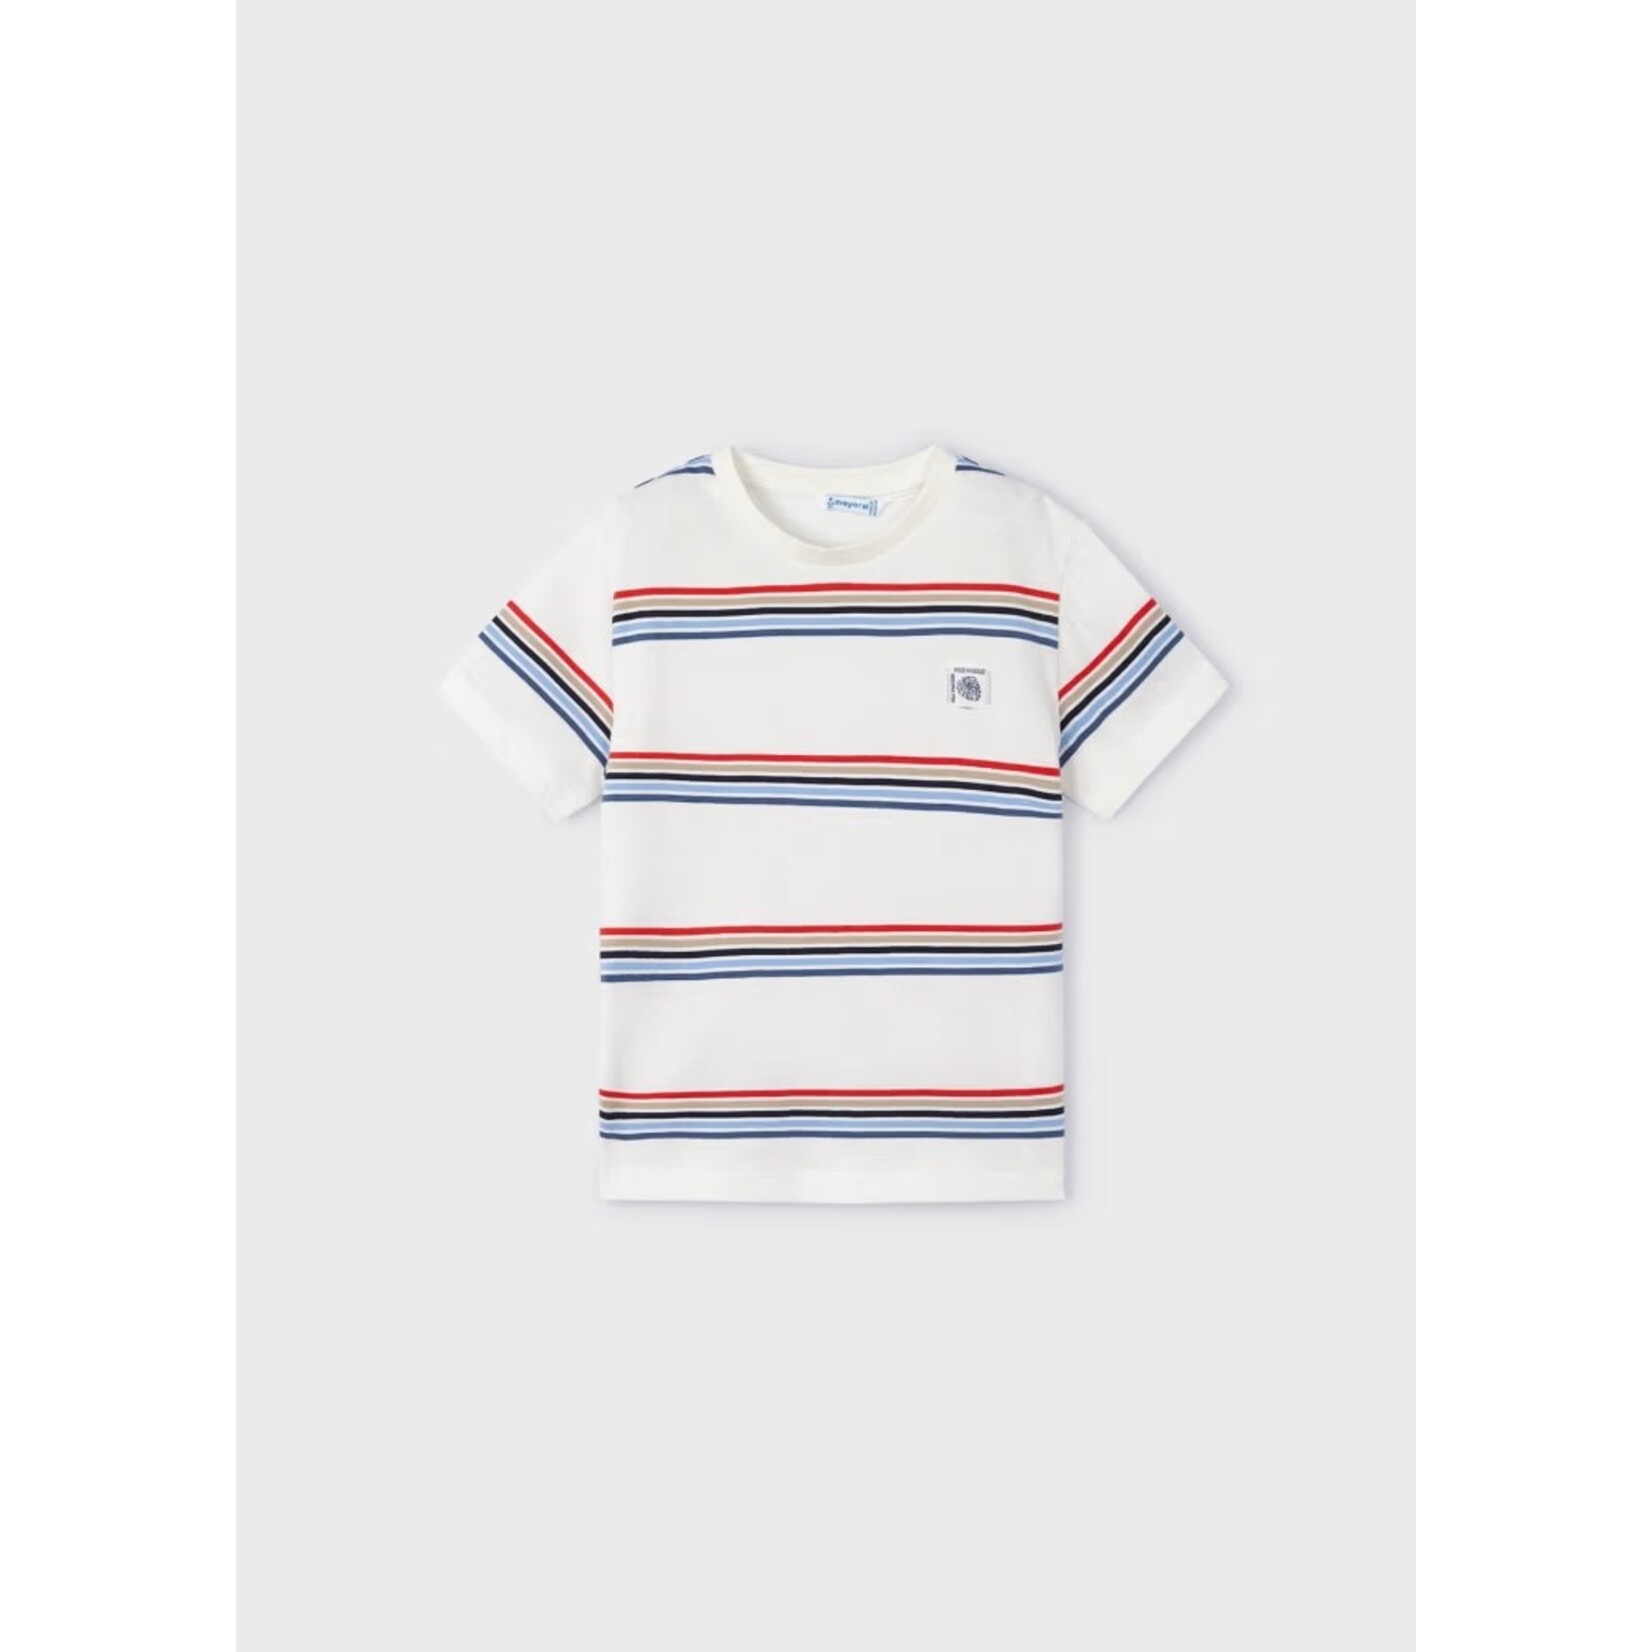 Mayoral MAYORAL - White Short Sleeve T-Shirt with Thin Blue and Red Stripes